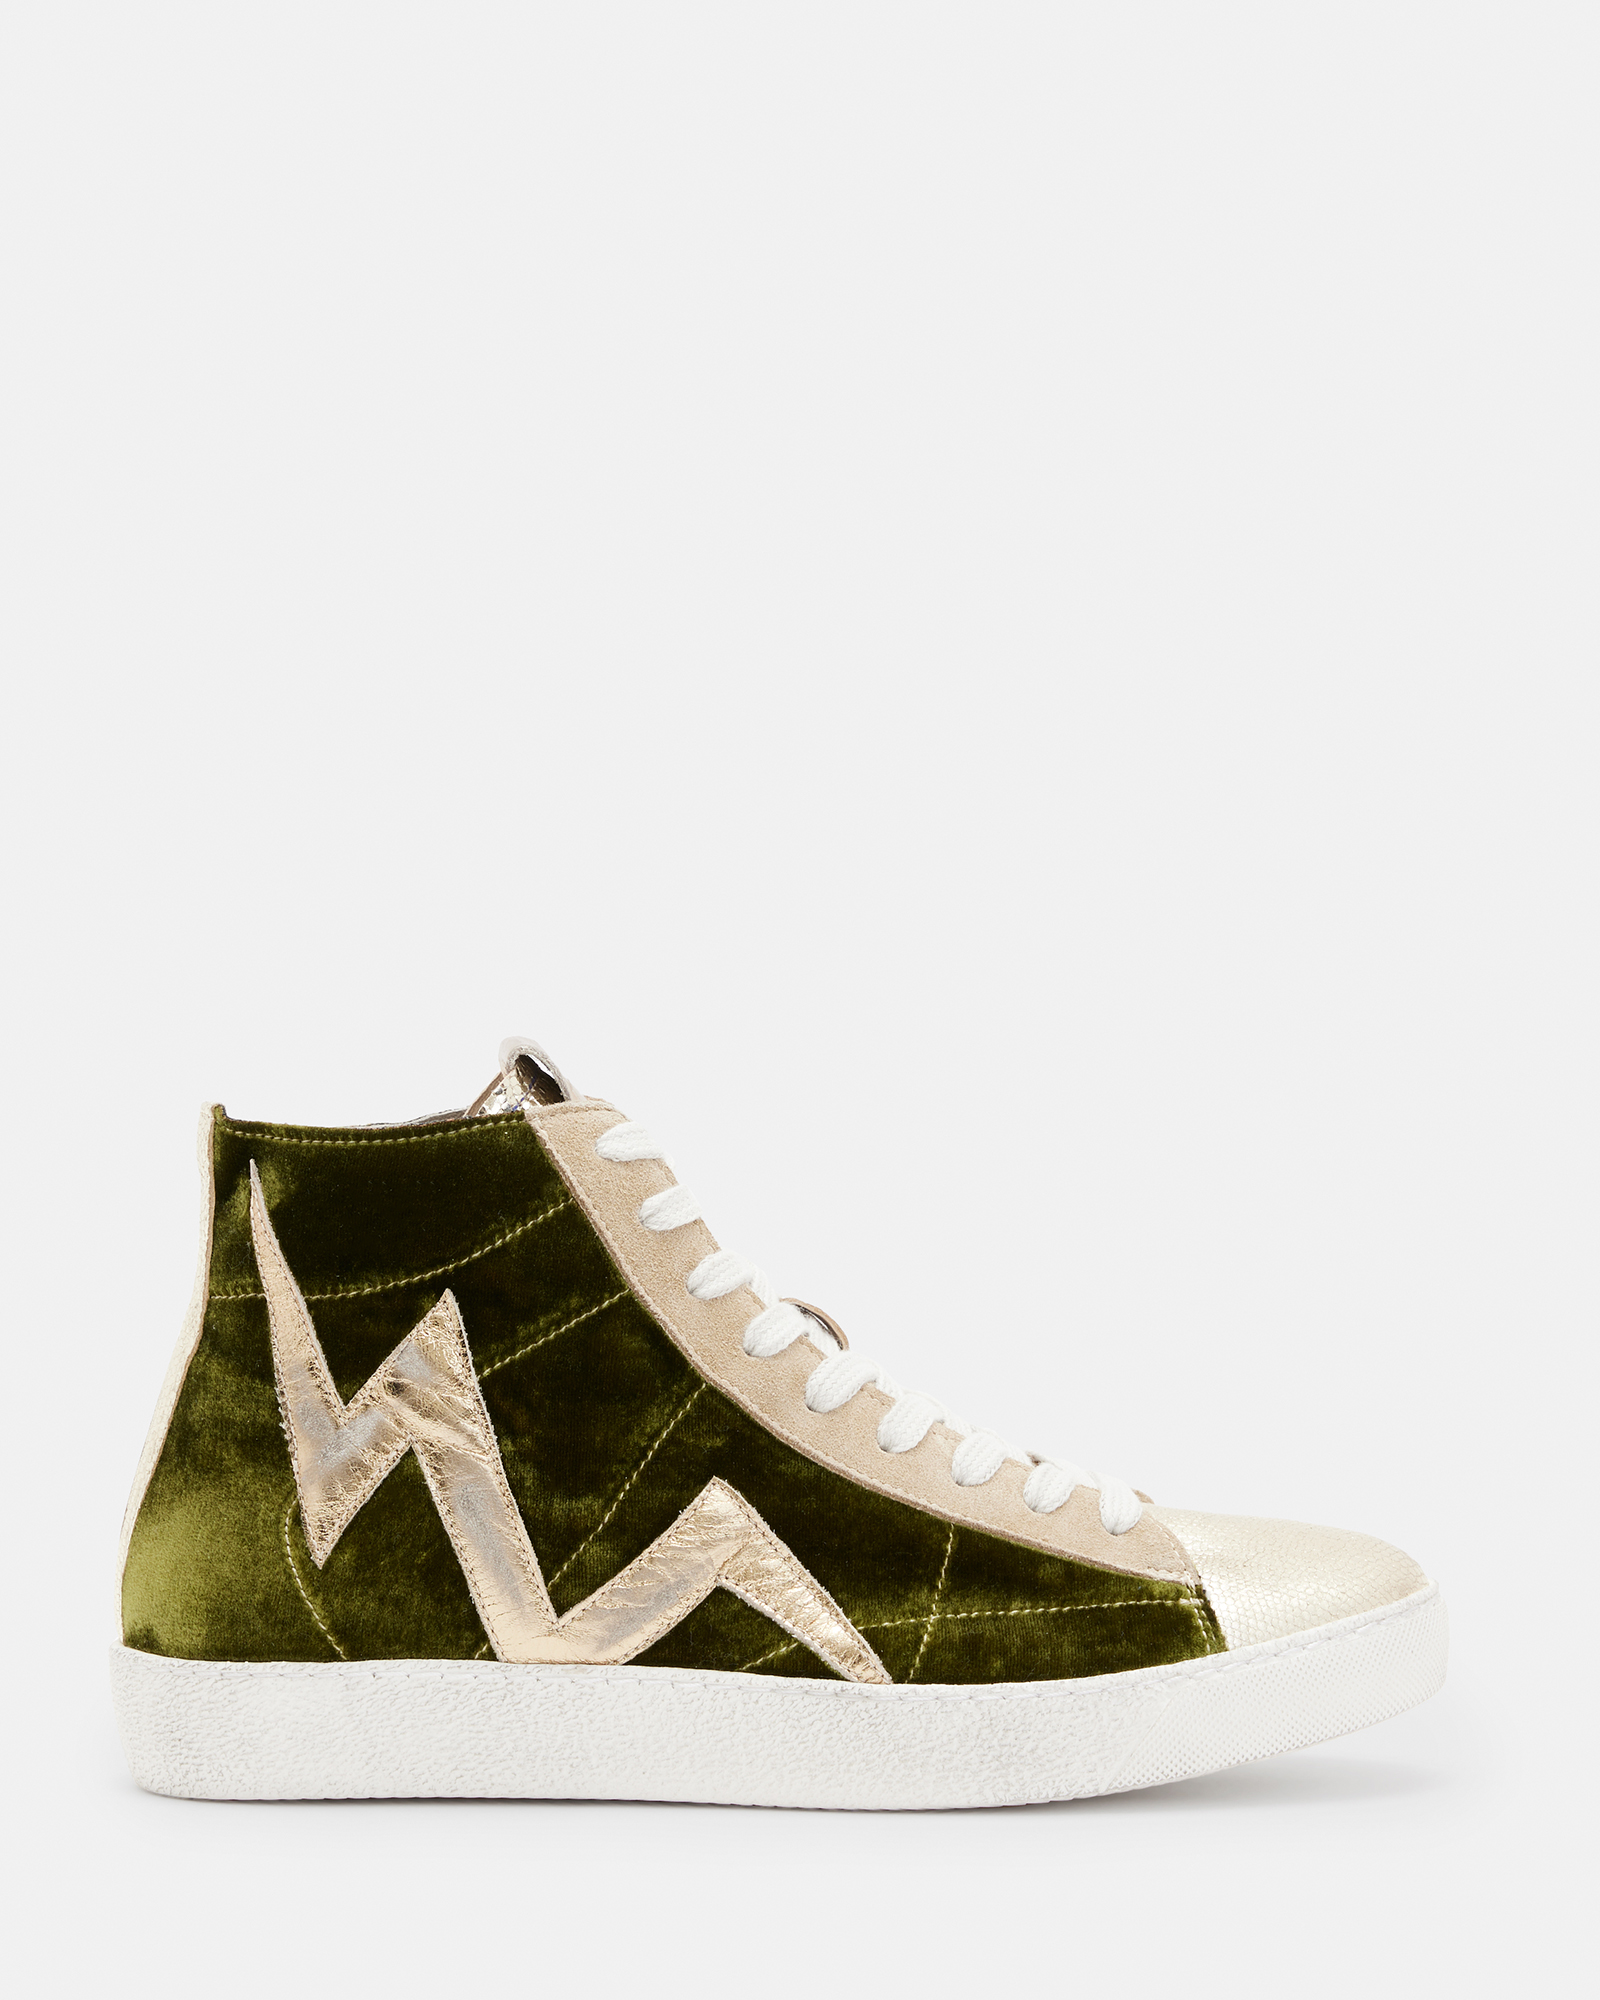 Tundy Bolt High Top Leather Trainers Green | ALLSAINTS